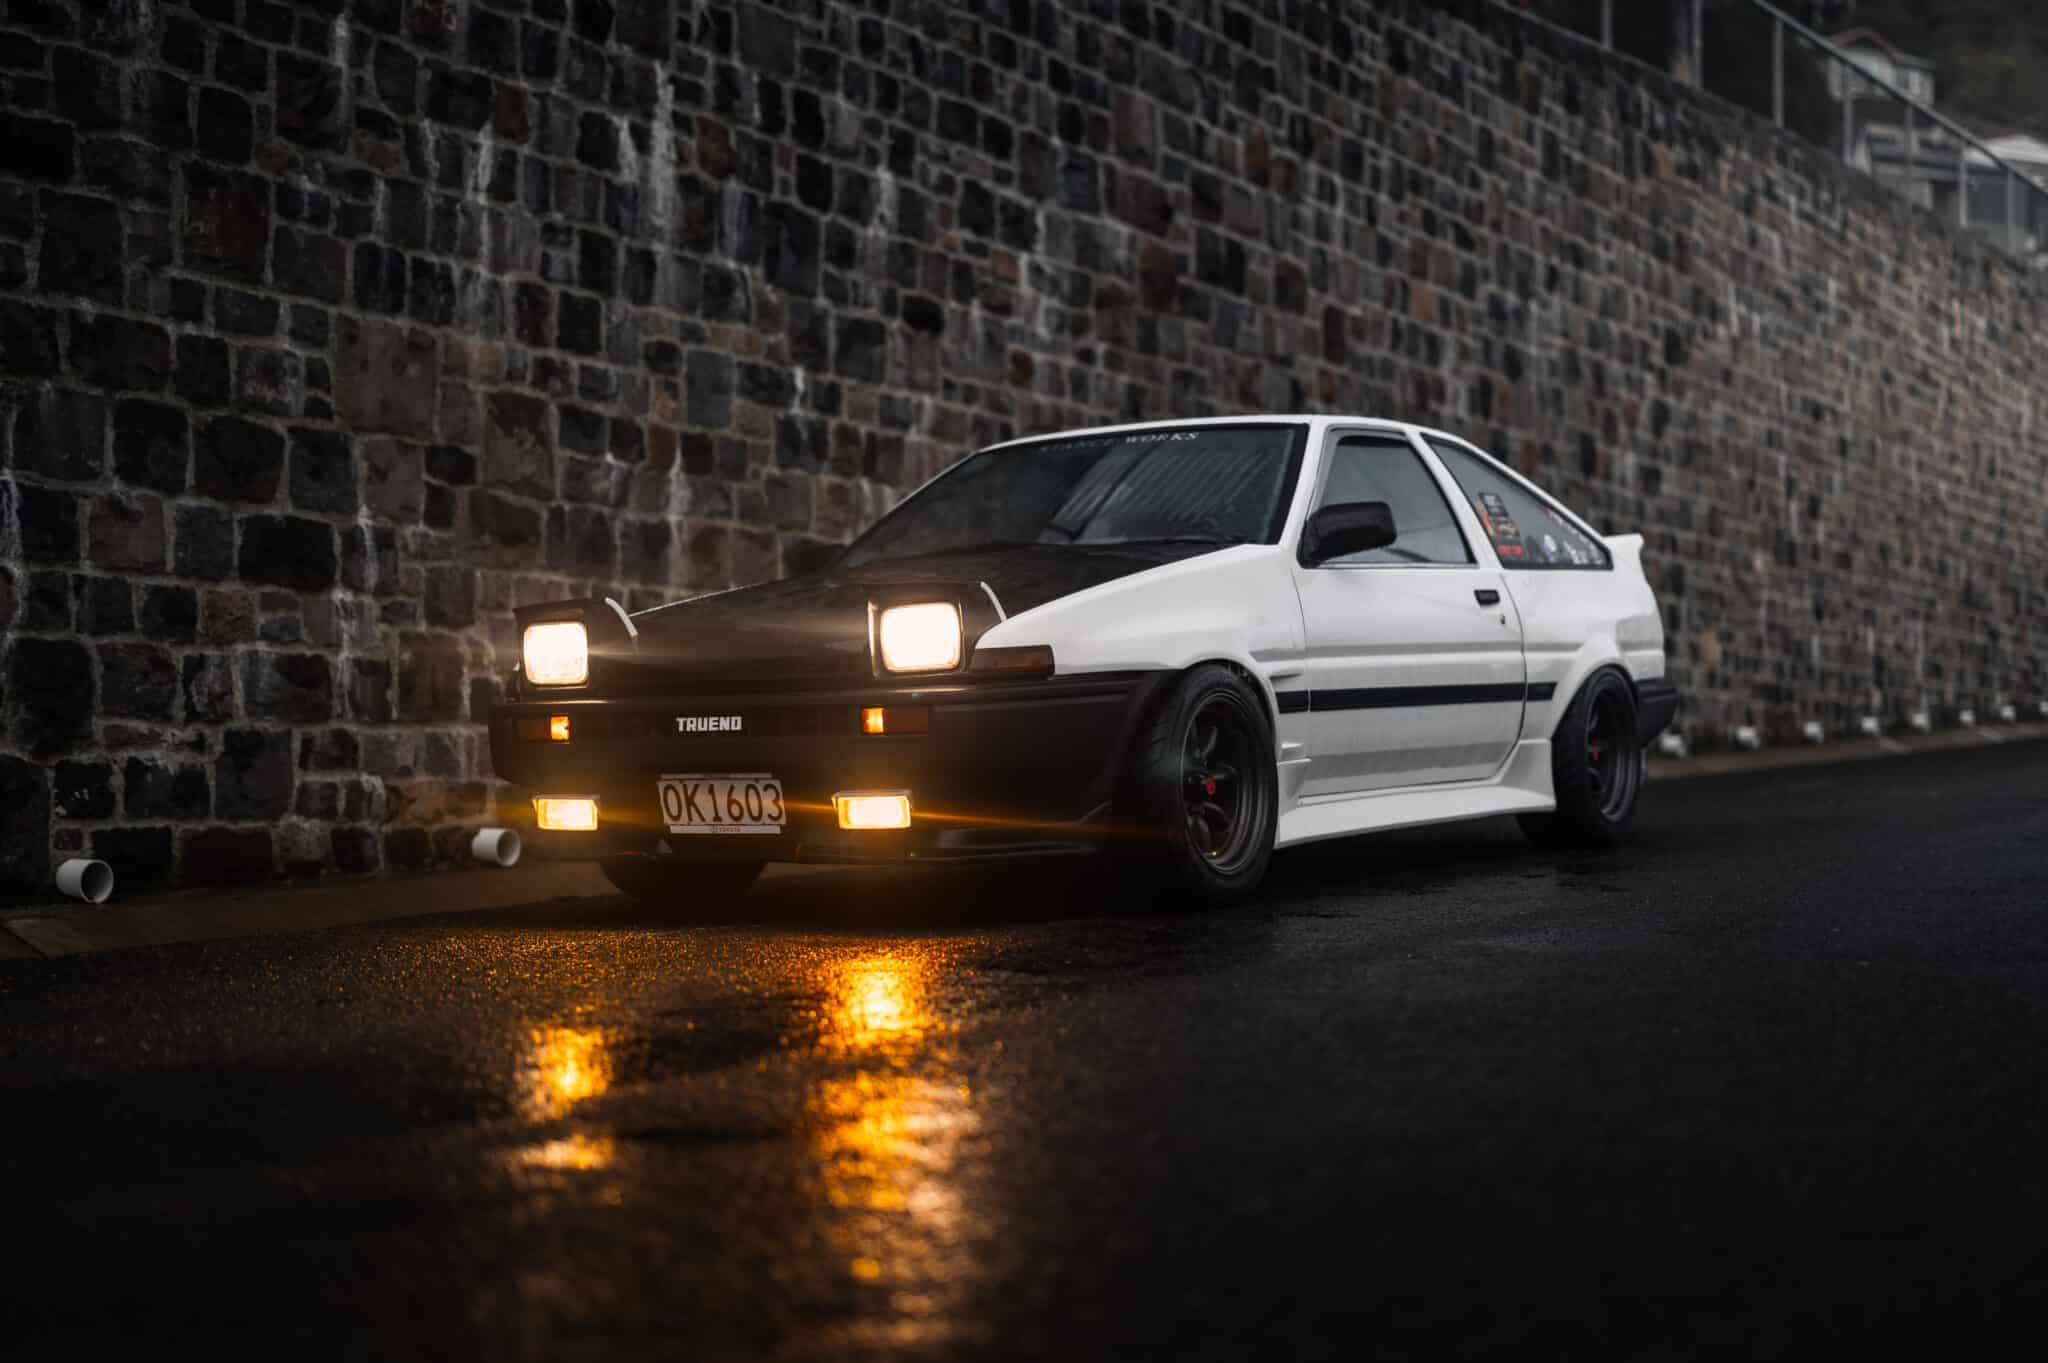 Toyota Corolla Levin AE86 from the movie 